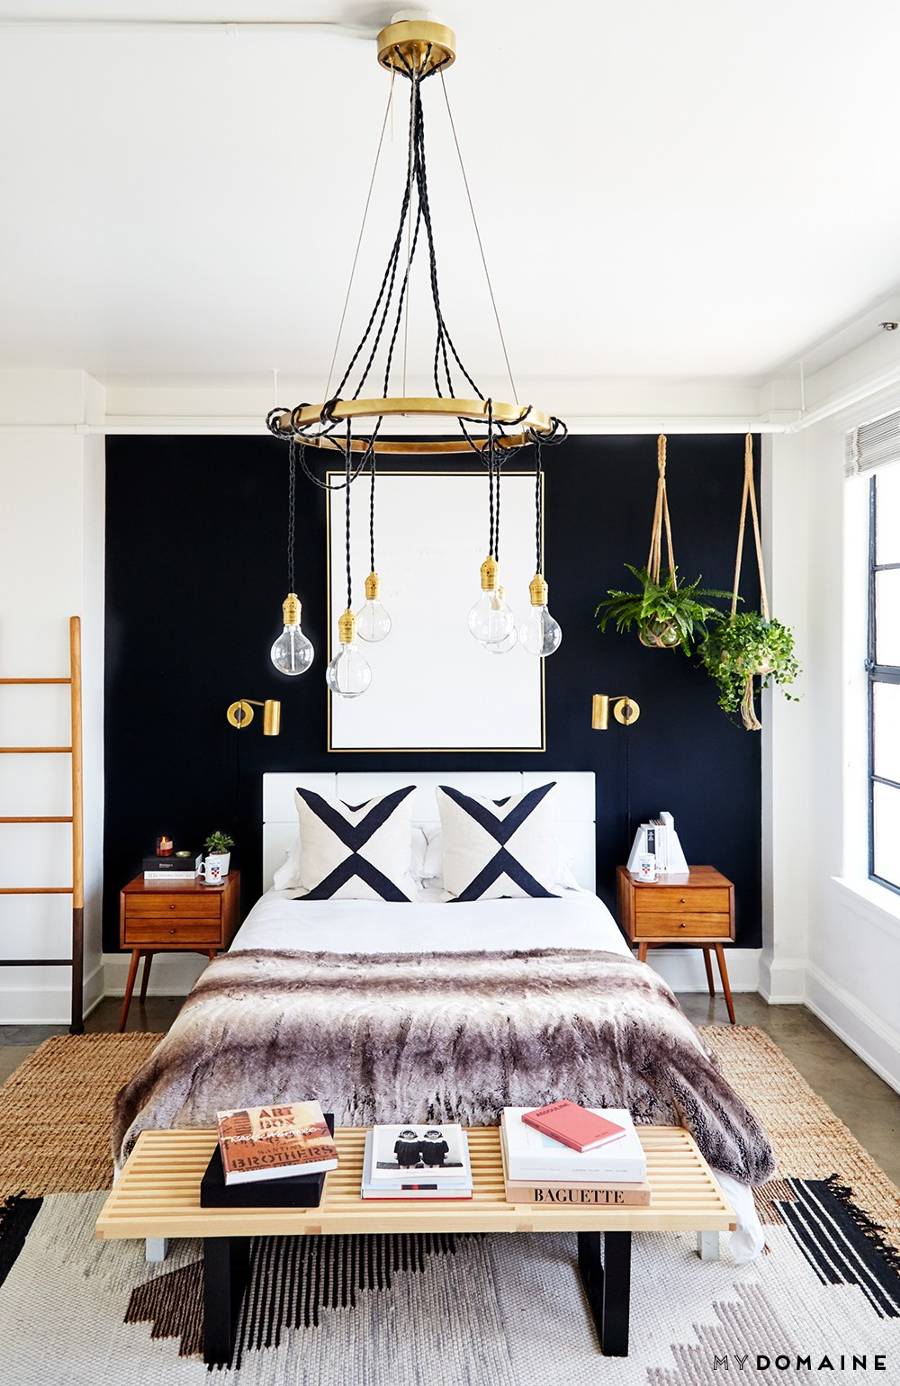 Celebrity Home Tour: Get The Look For Less /// A shopping guide by Design Fixation #homedecor